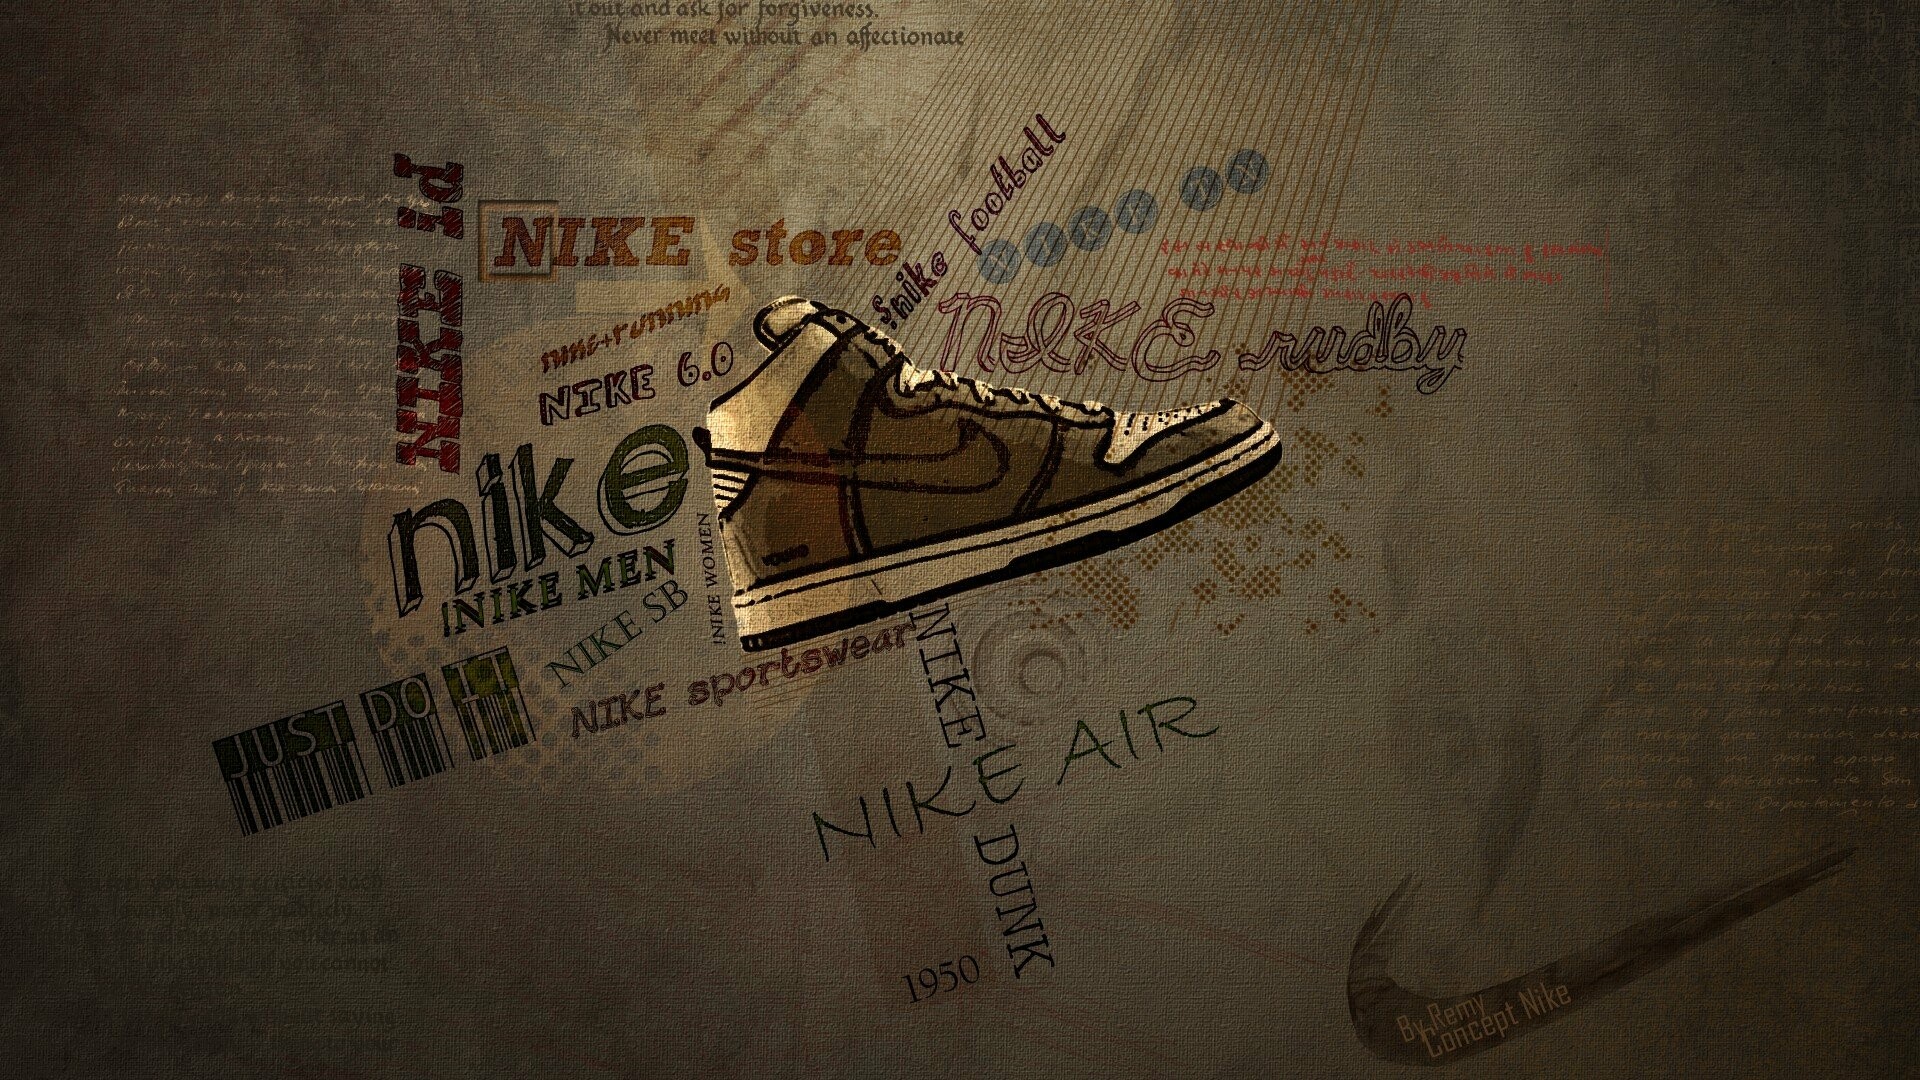 Nike: The world's leading innovator in athletic footwear, apparel, equipment and accessories. 1920x1080 Full HD Background.